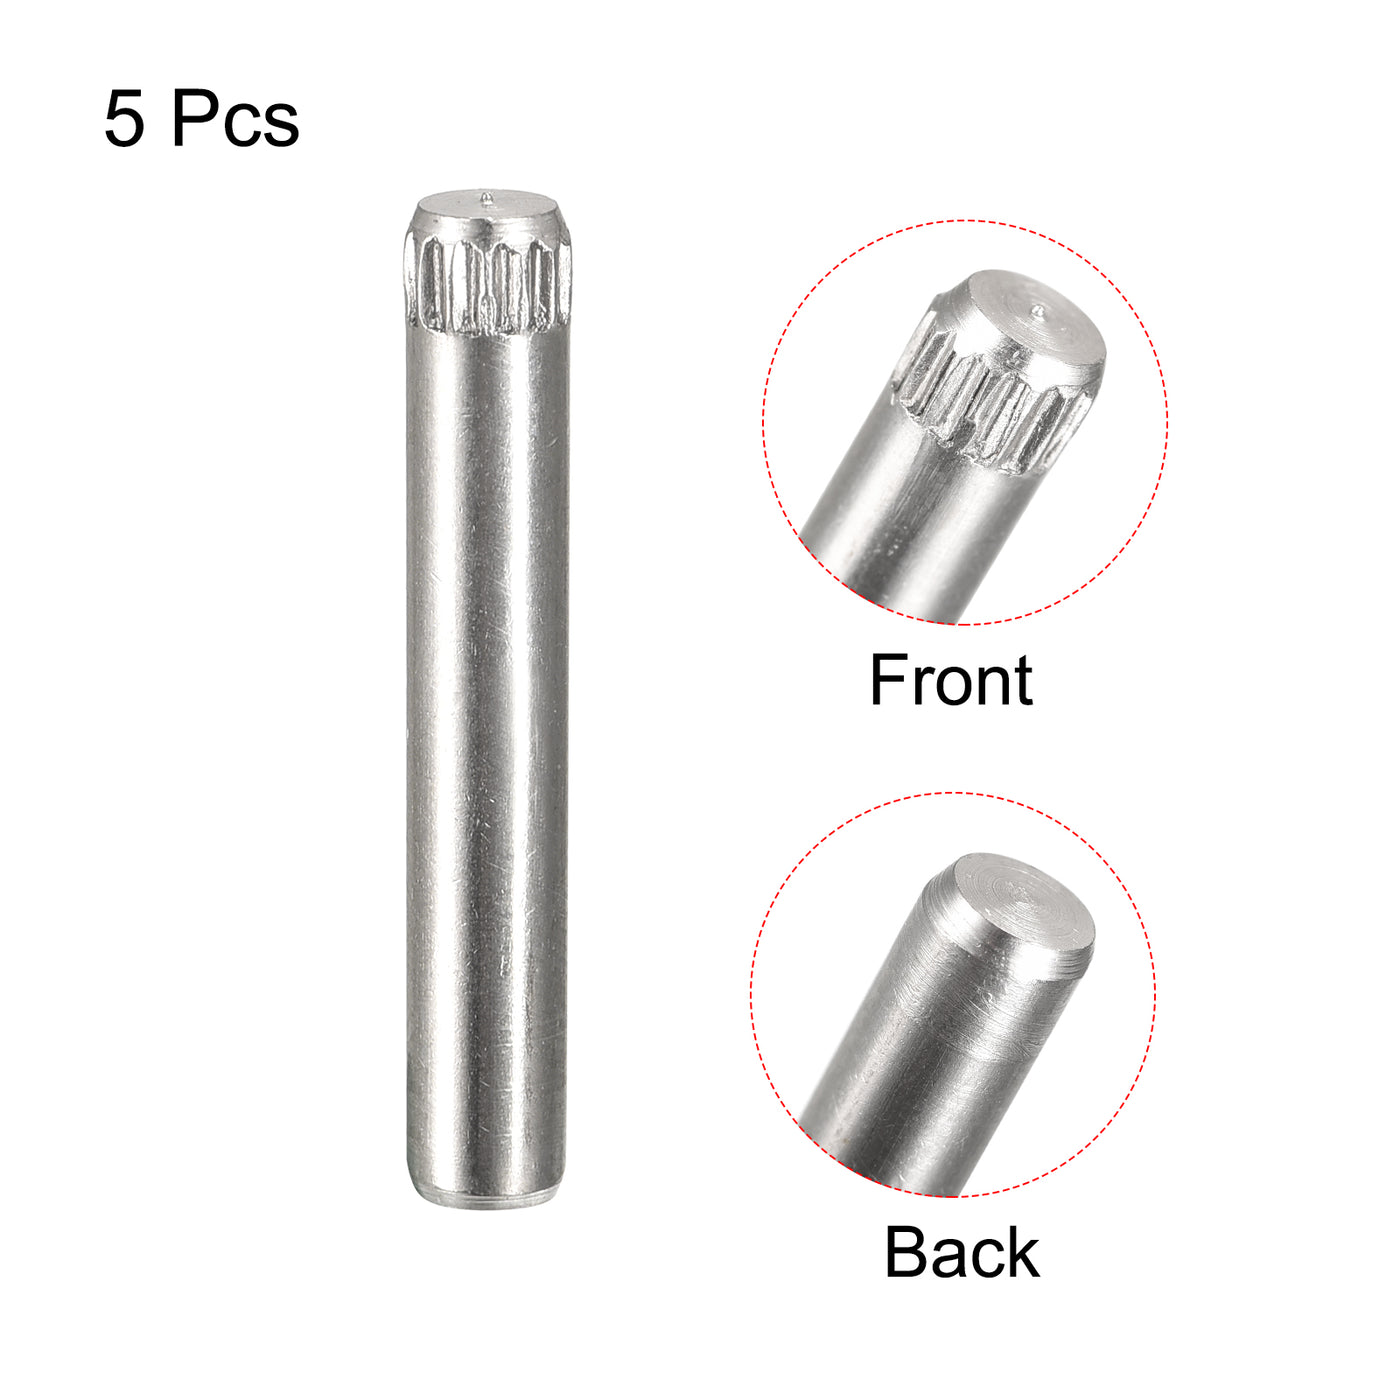 uxcell Uxcell 4x22mm 304 Stainless Steel Dowel Pins, 5Pcs Knurled Head Flat End Dowel Pin